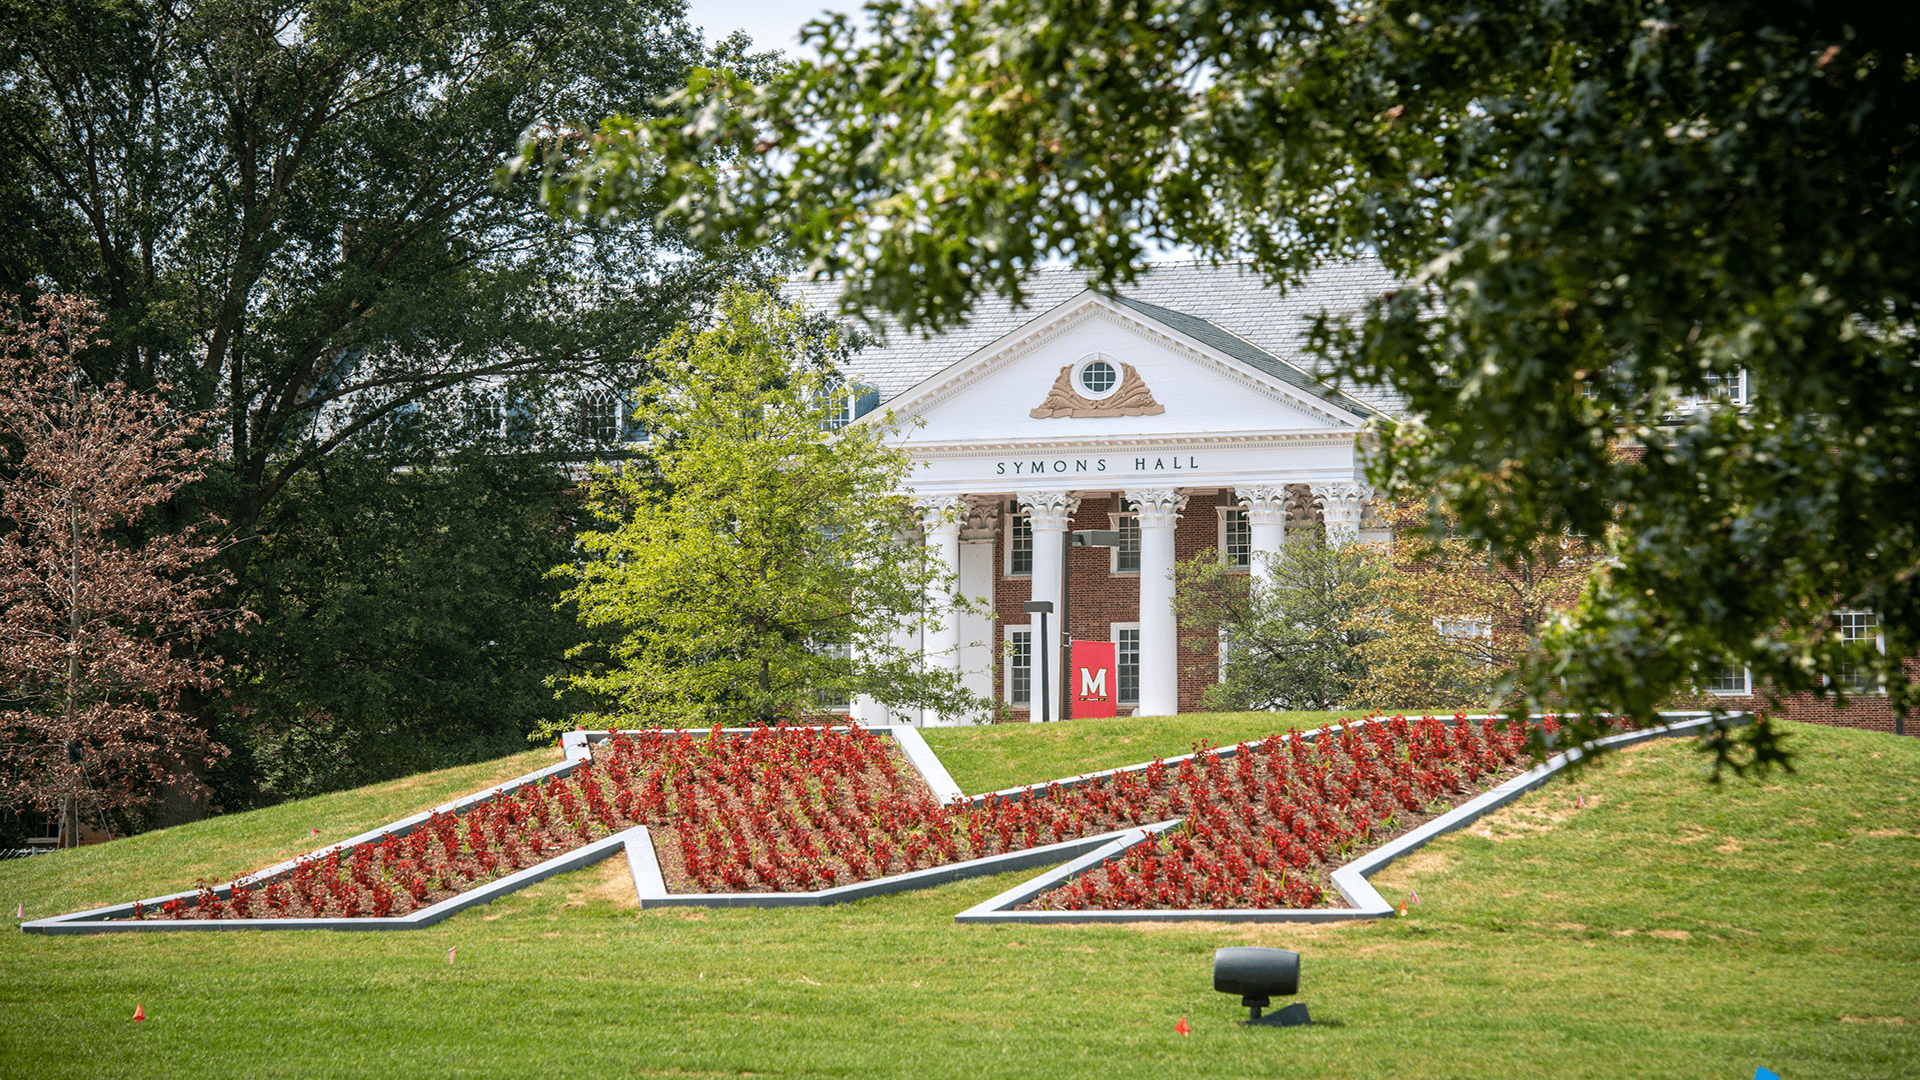 The new "M" installation on Campus